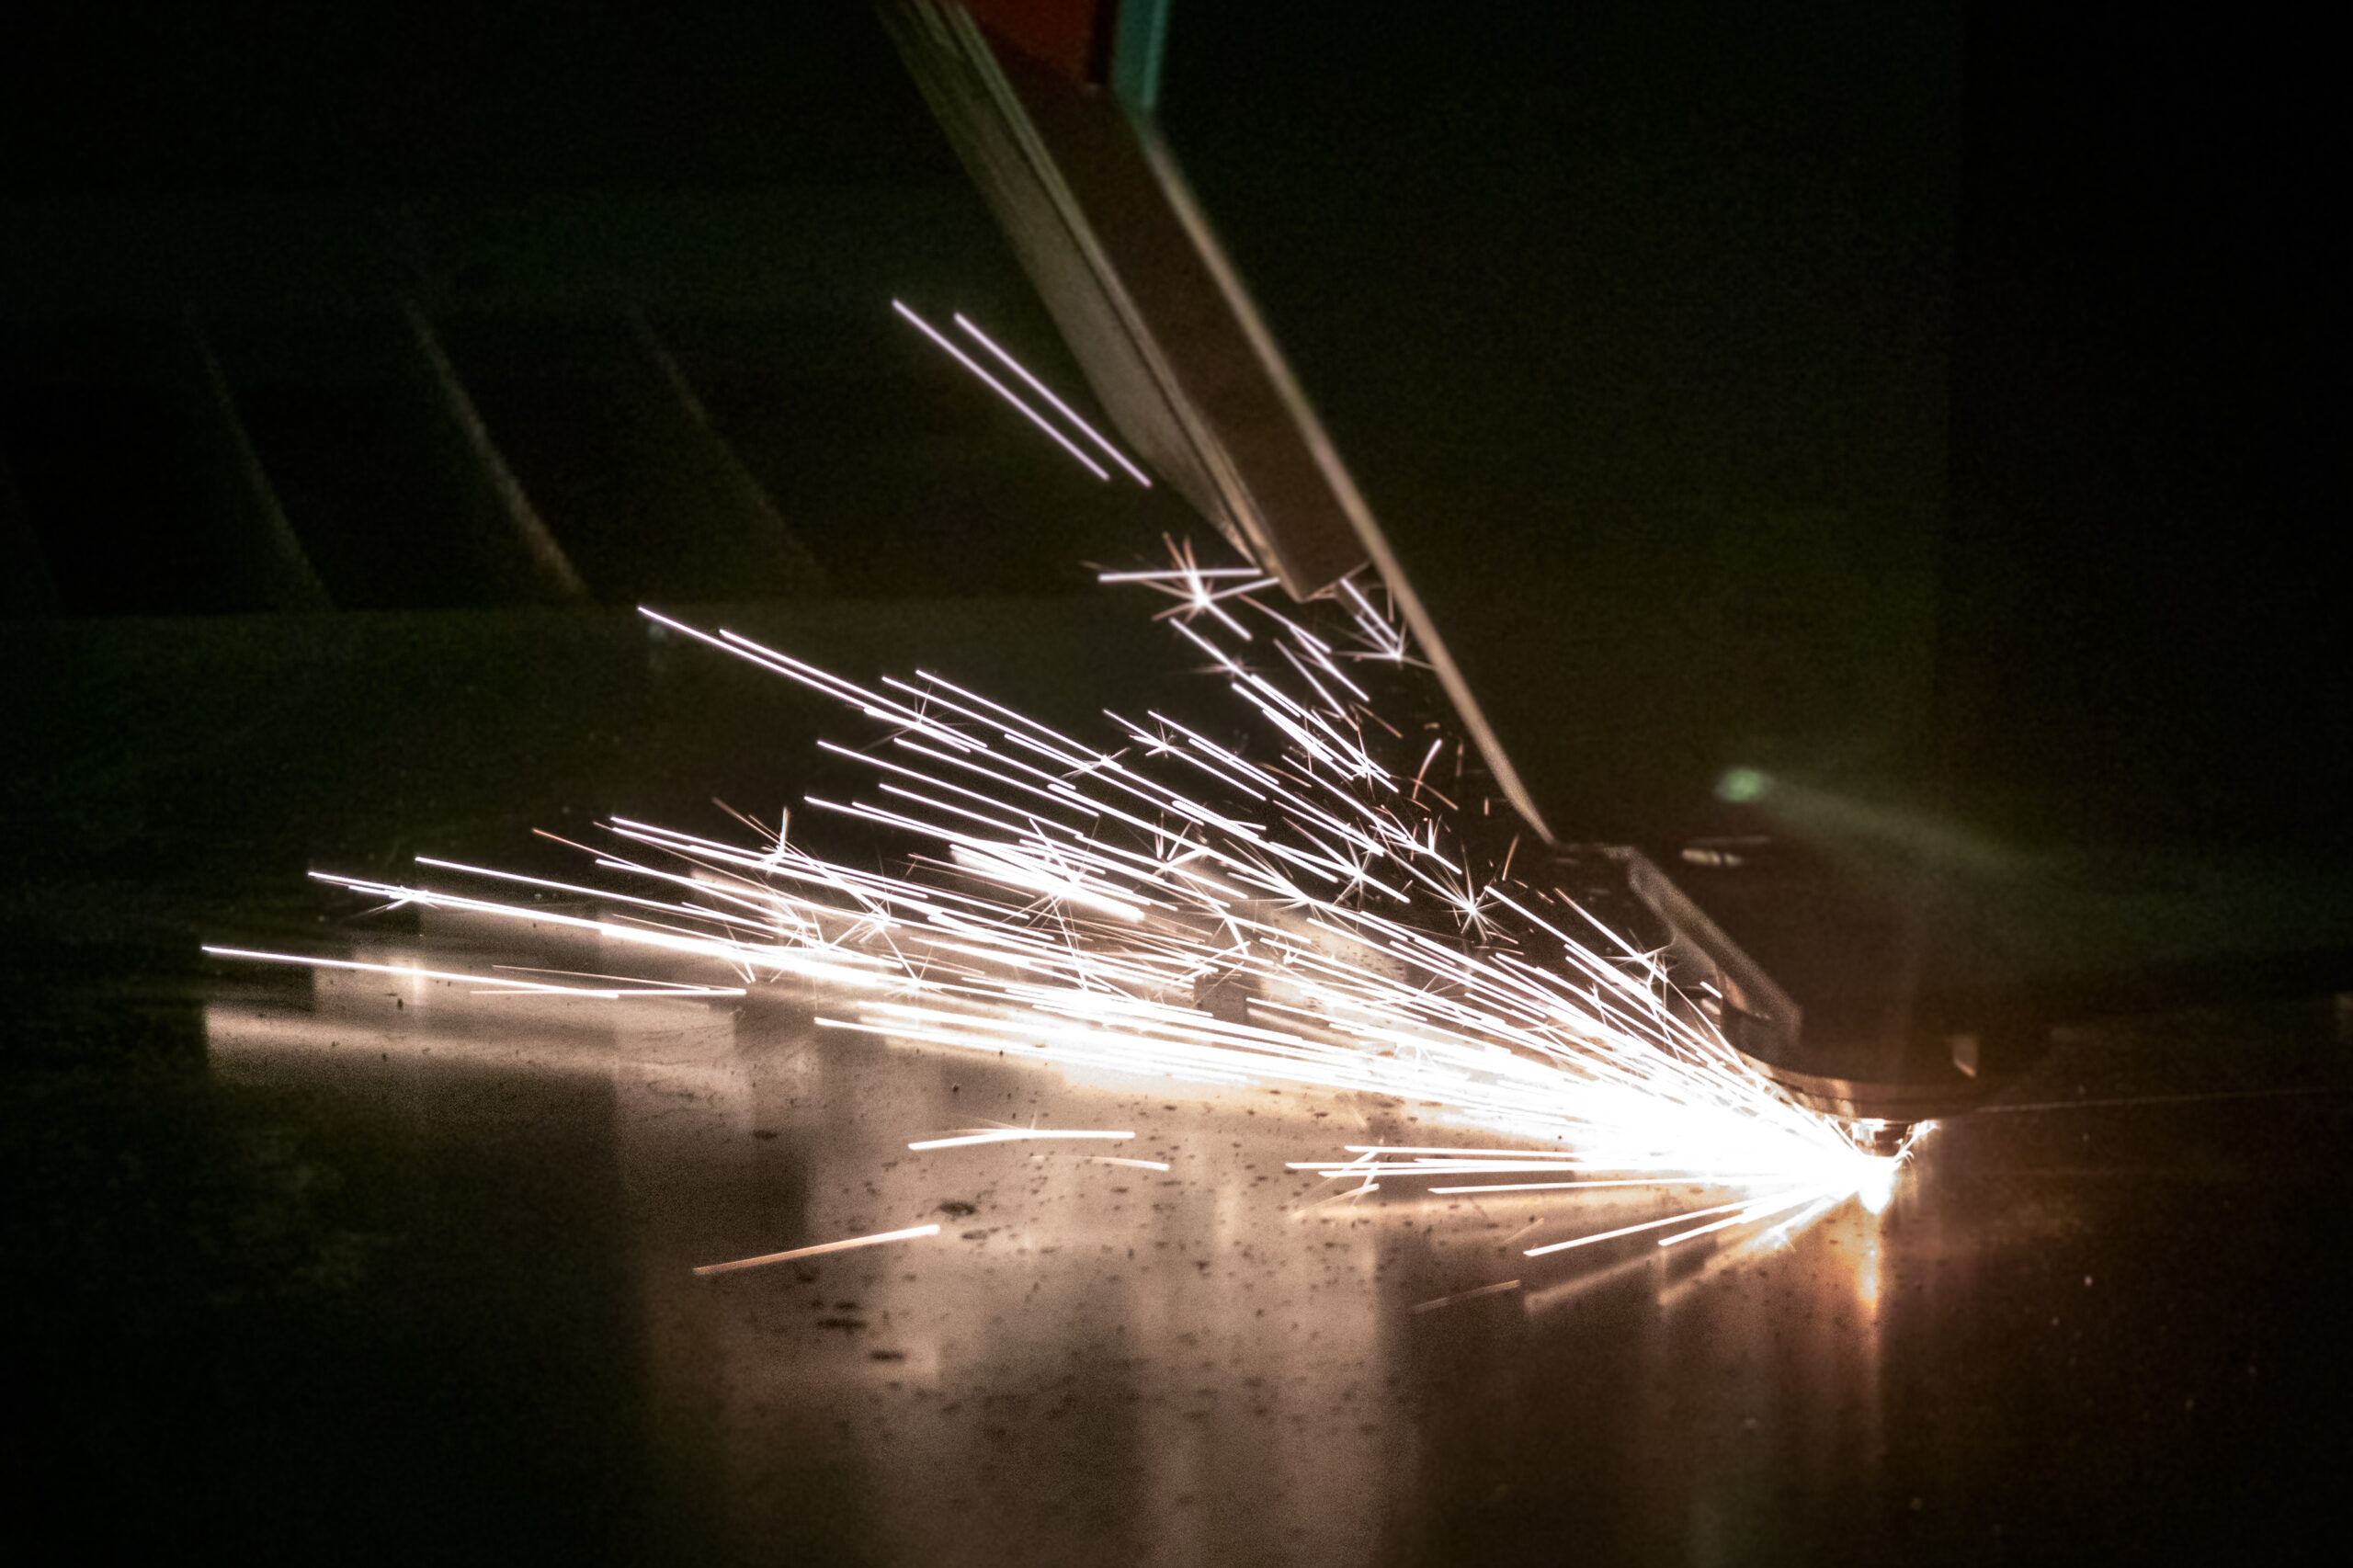 A man is laser cutting metal sheets with sparks in the dark.